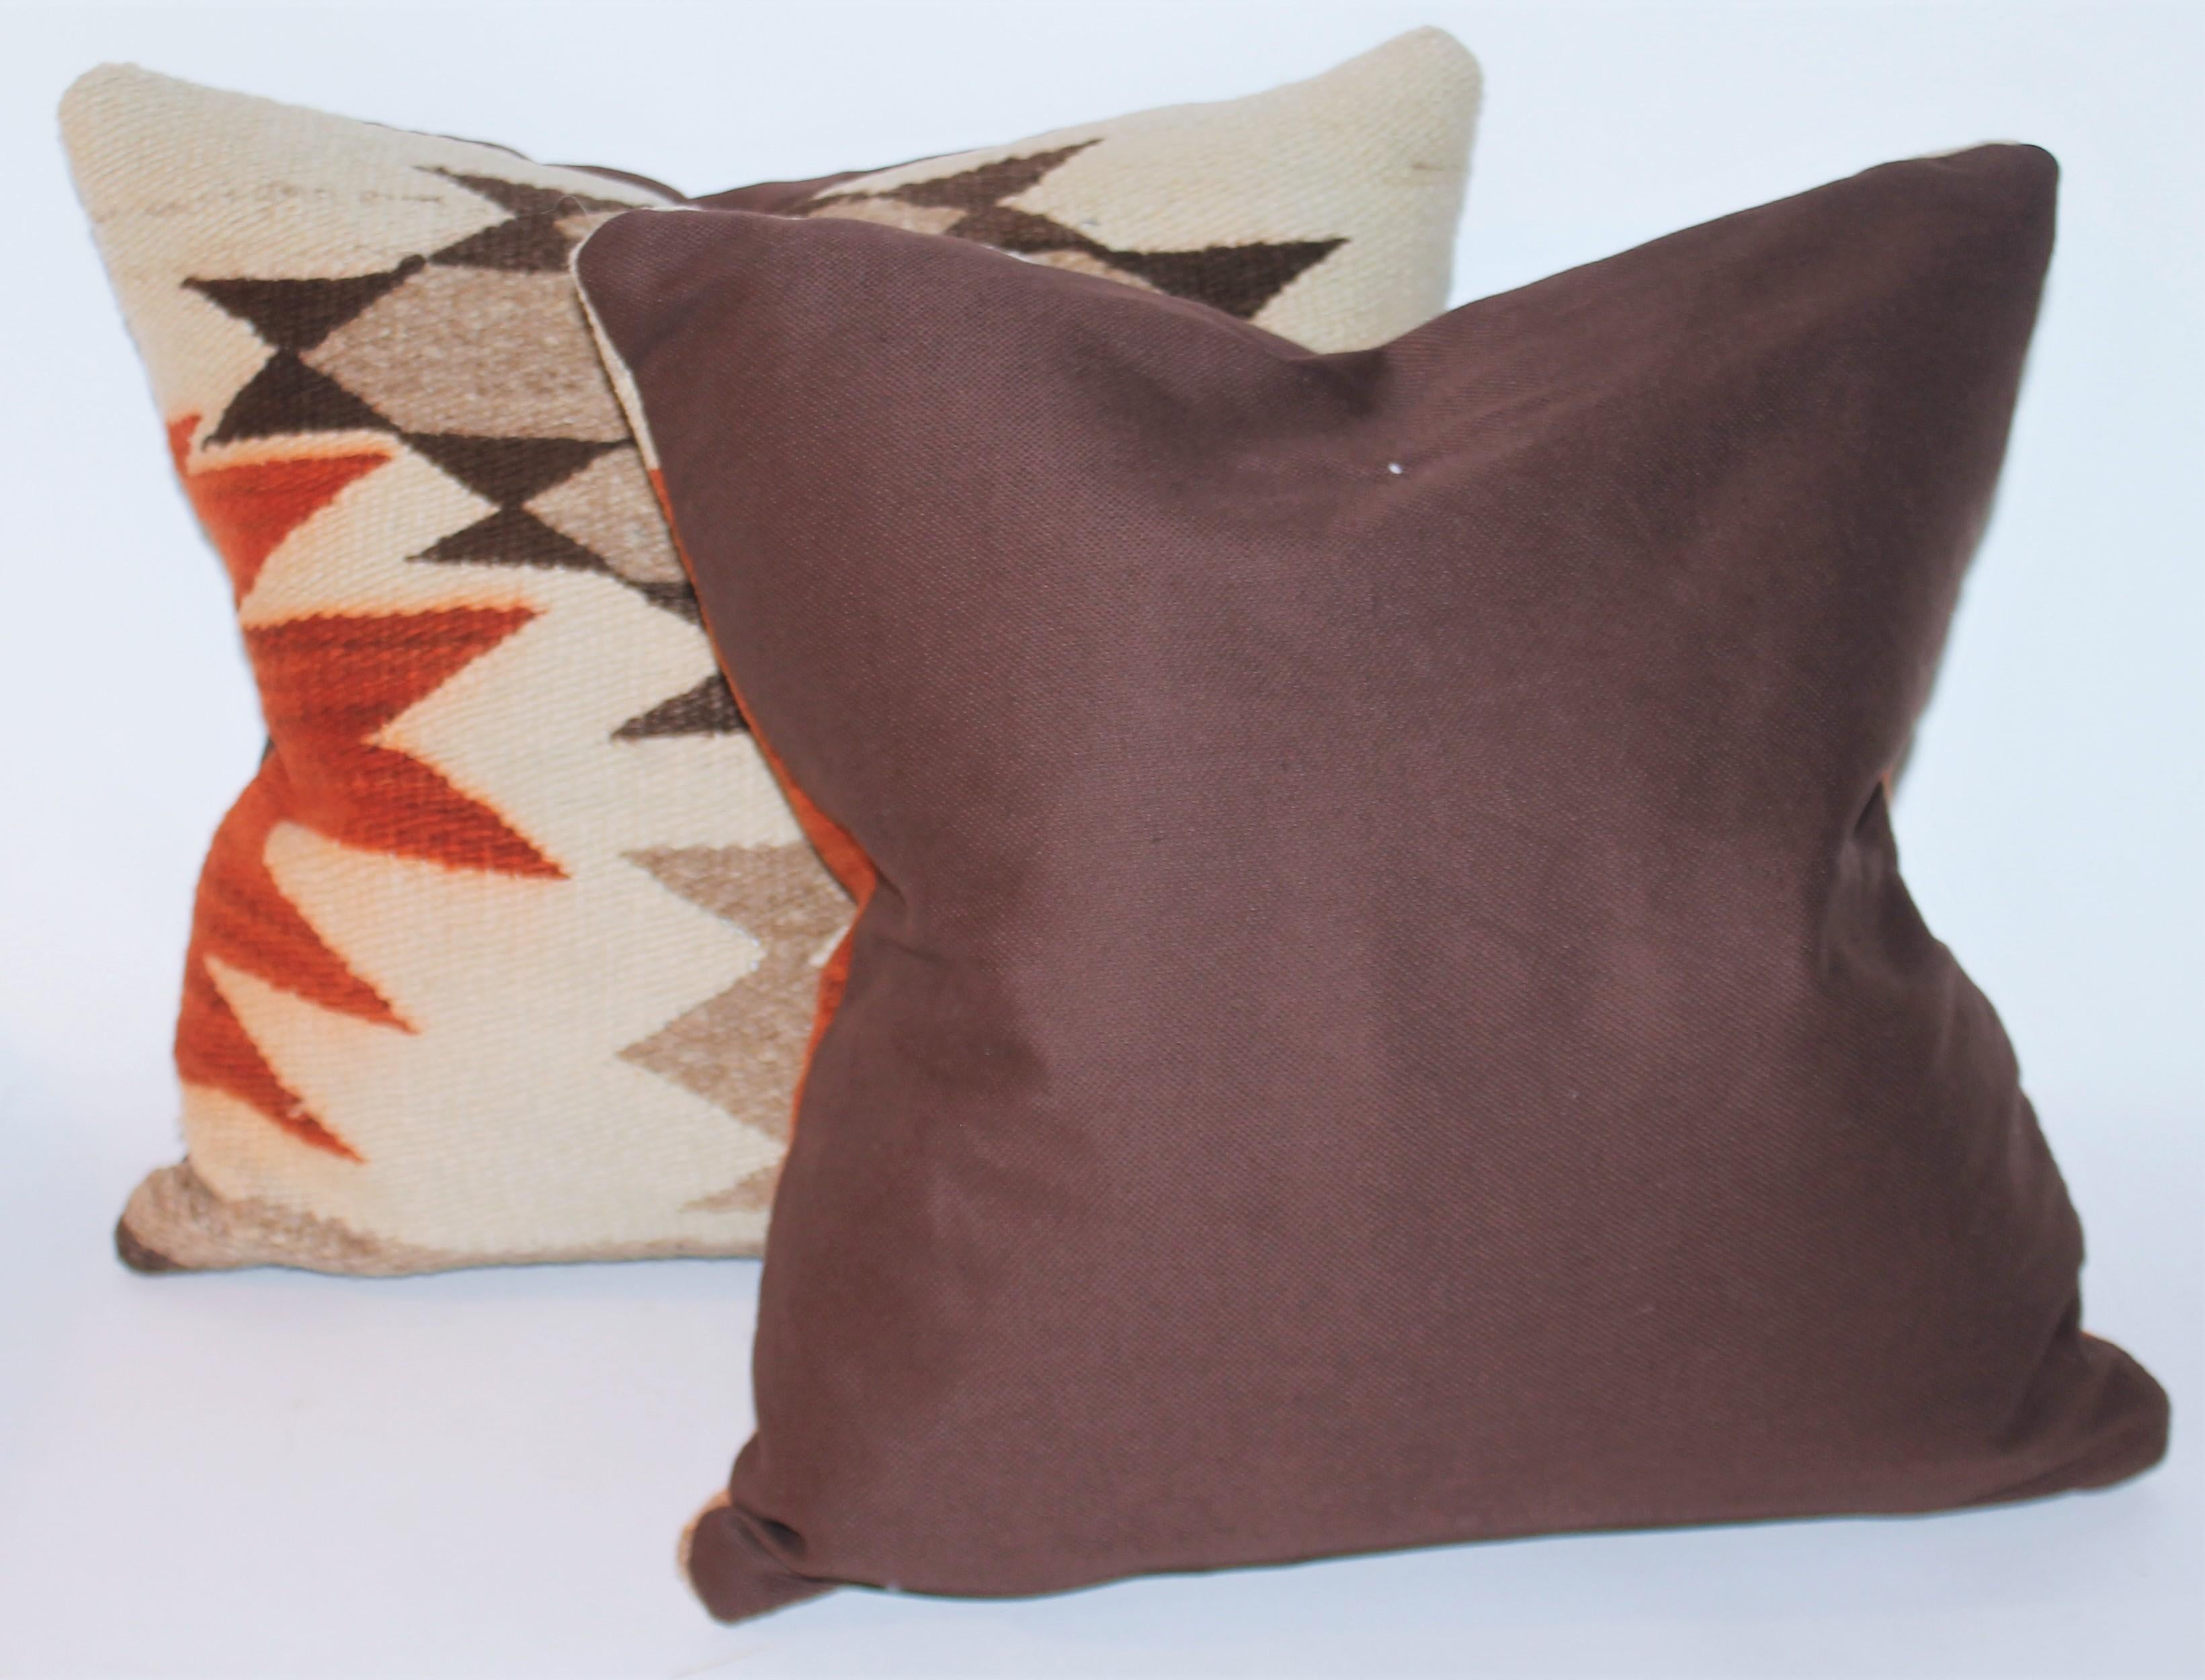 Geometric Navajo Indian weaving pillows in good condition. Brown cotton linen pillows. Sold as a pair.